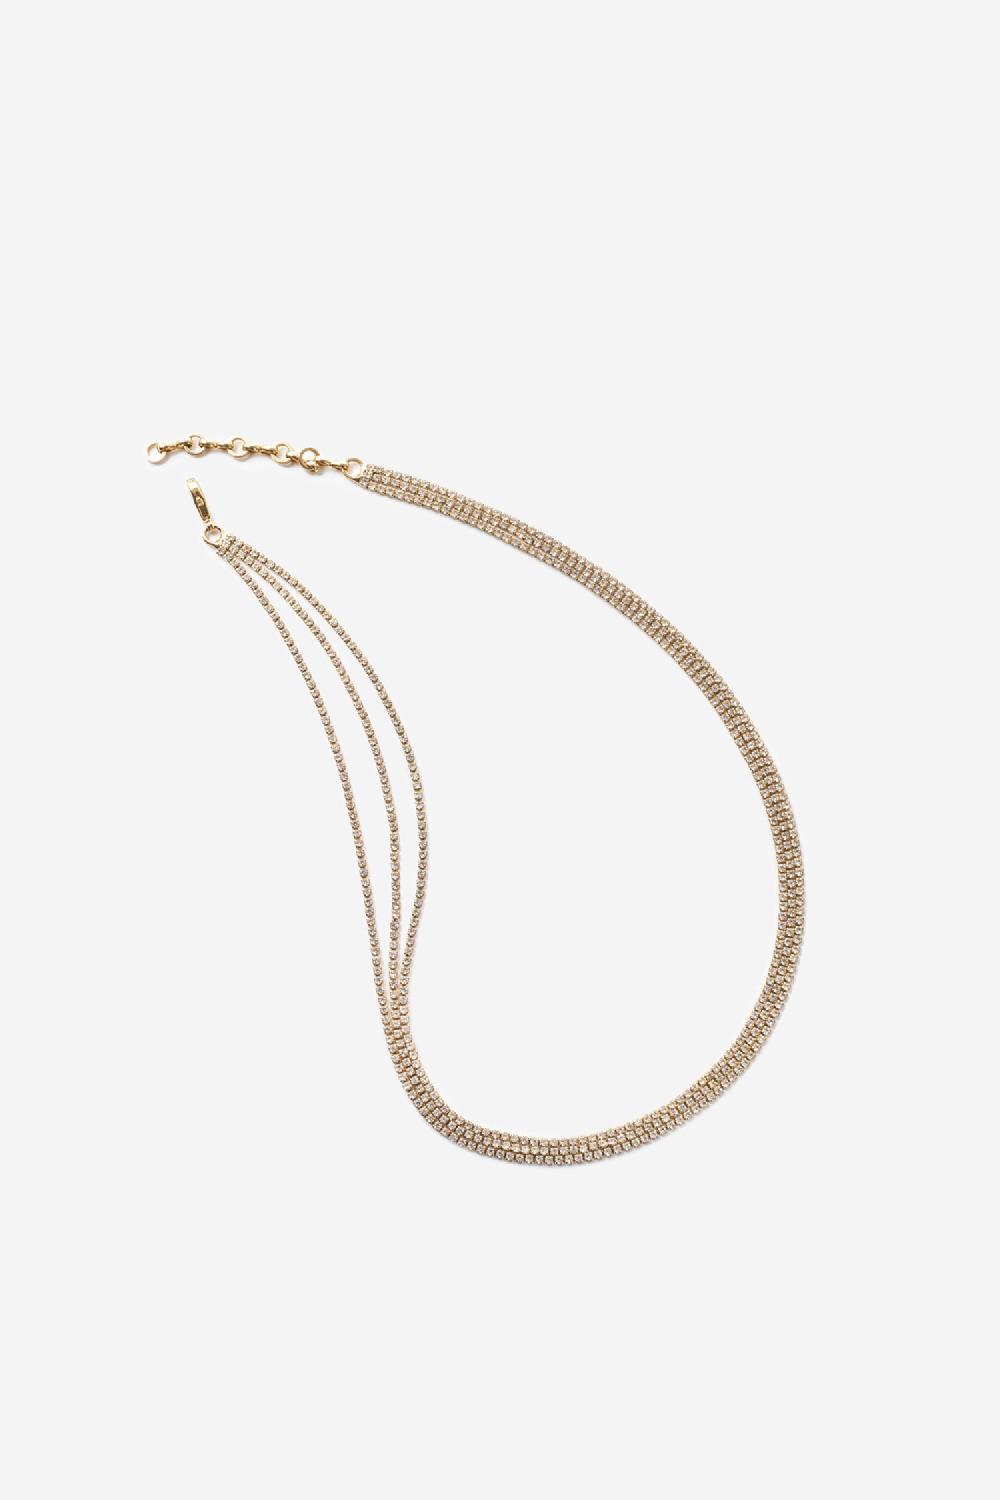 Carry Necklace, Women, Gold